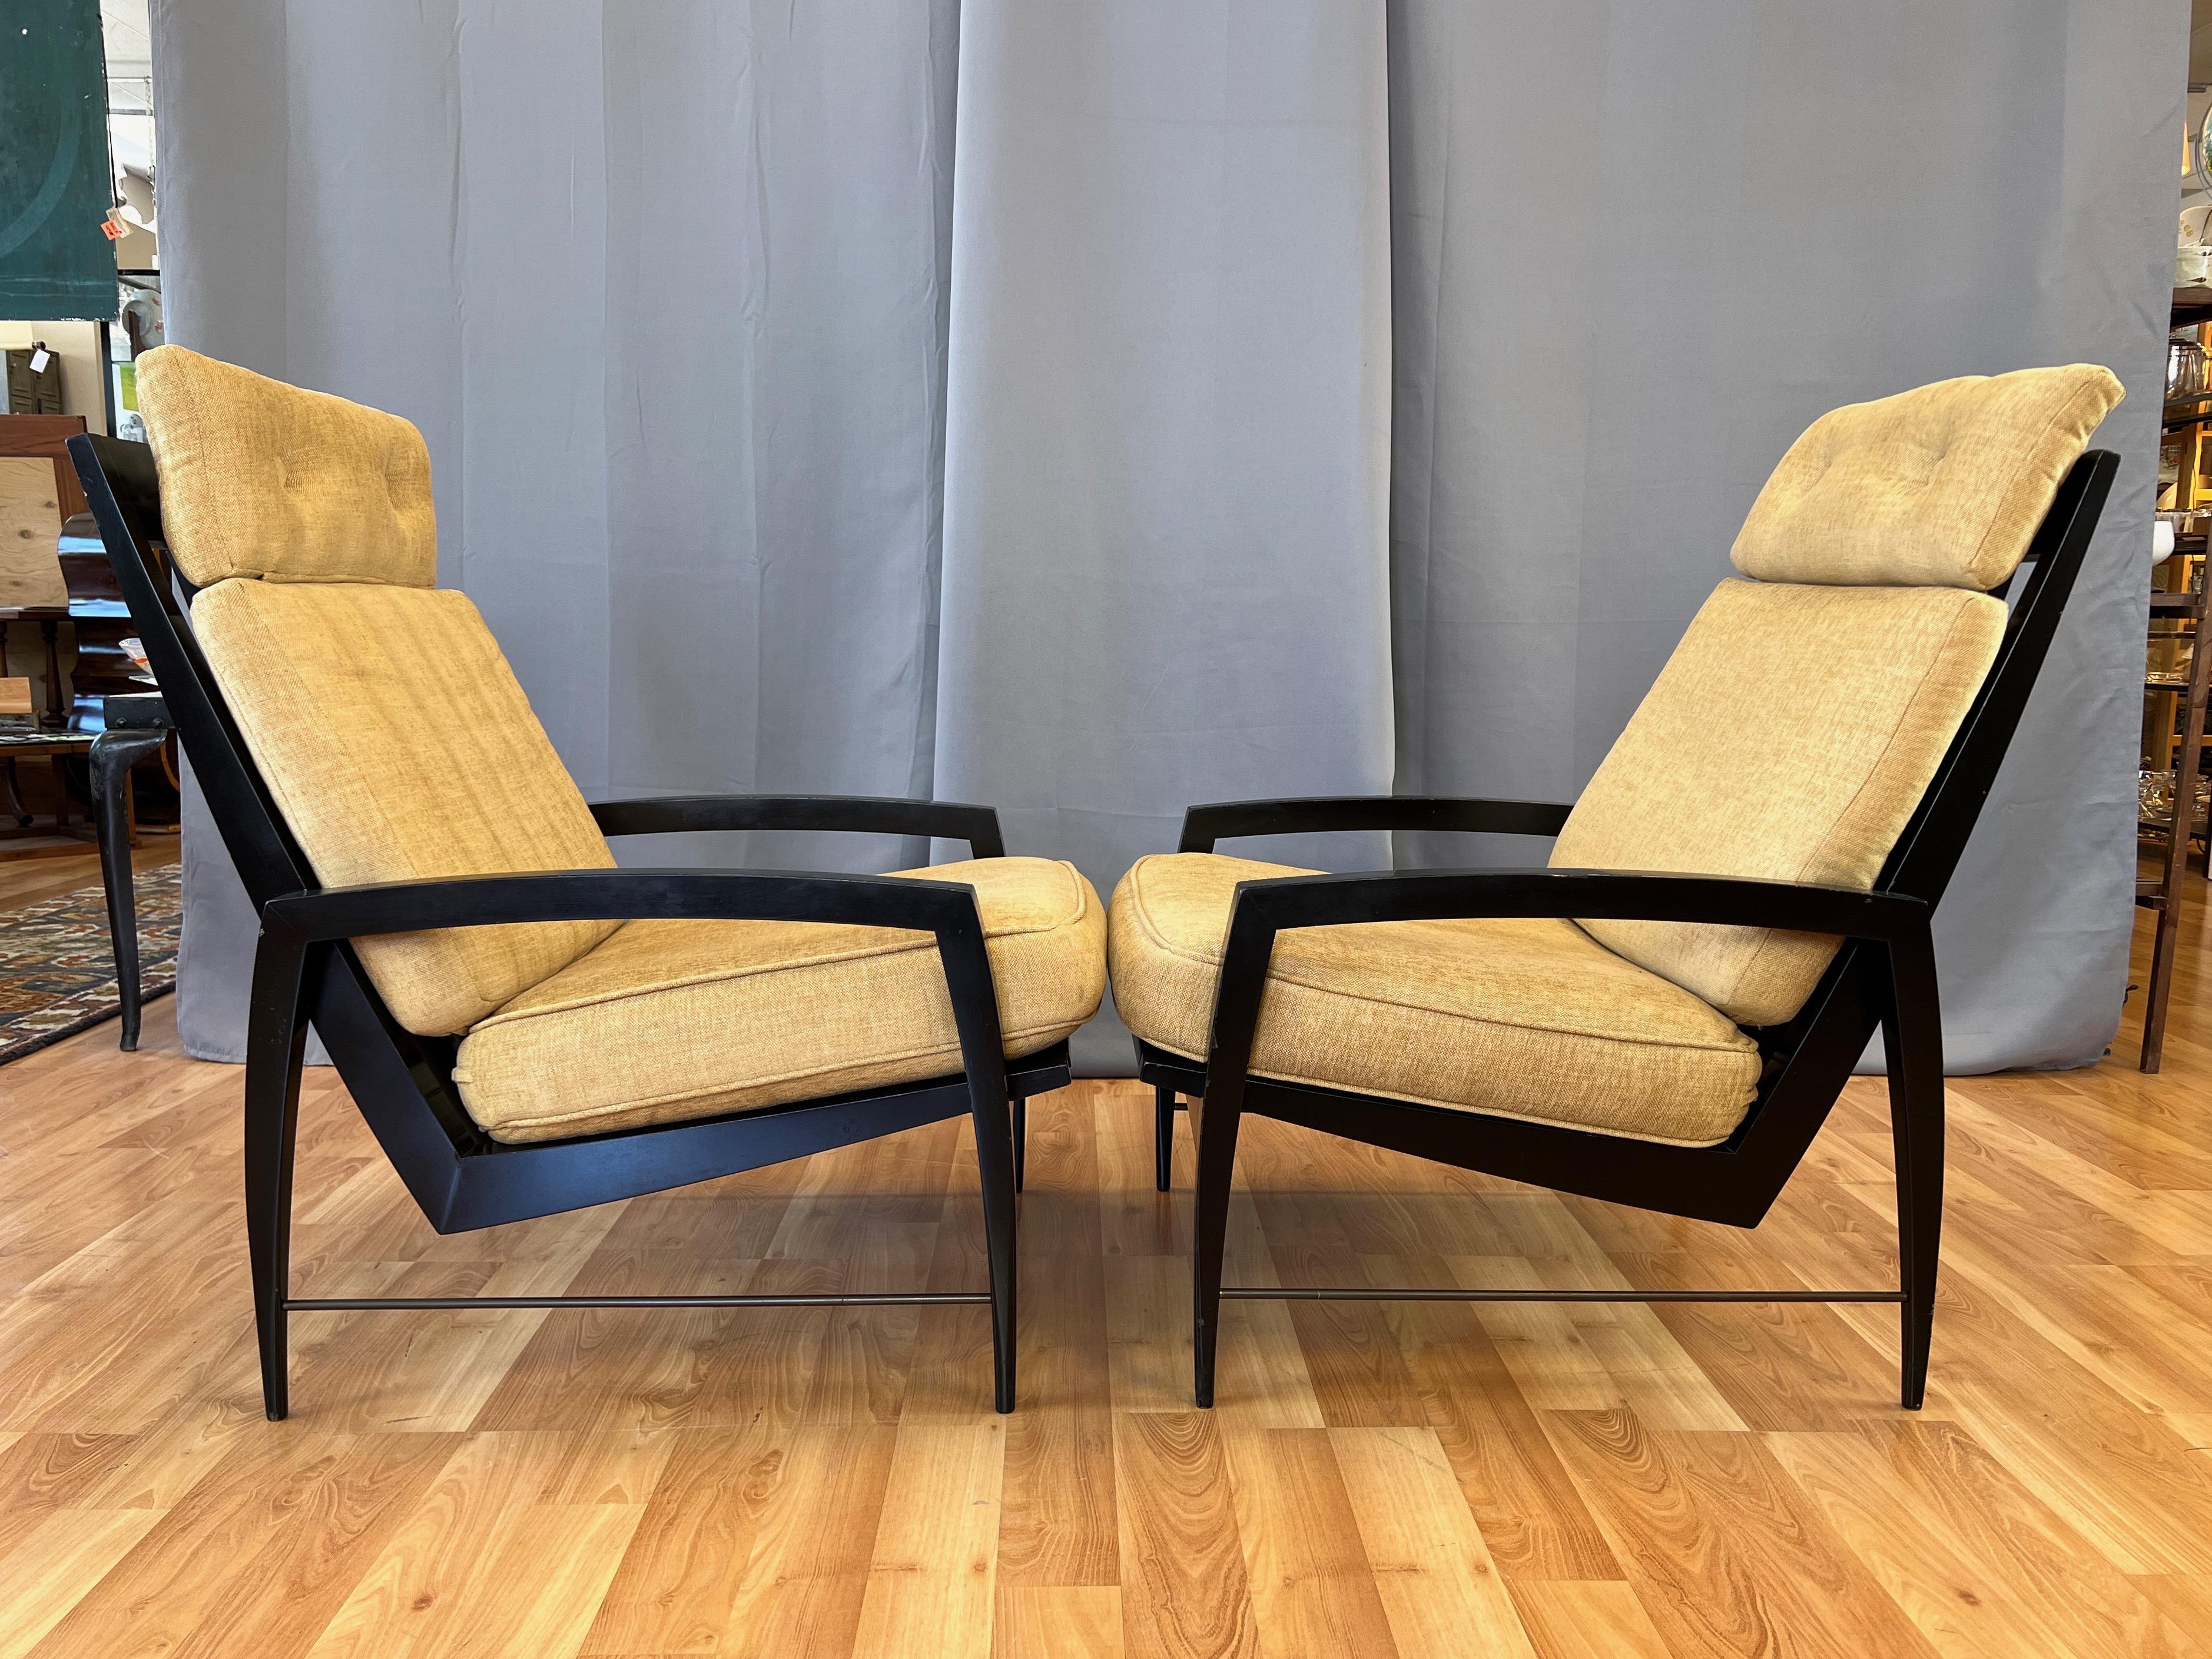 Pair of Dan Johnson for Selig Black Lacquered High-Back Lounge Chairs, 1950s For Sale 5